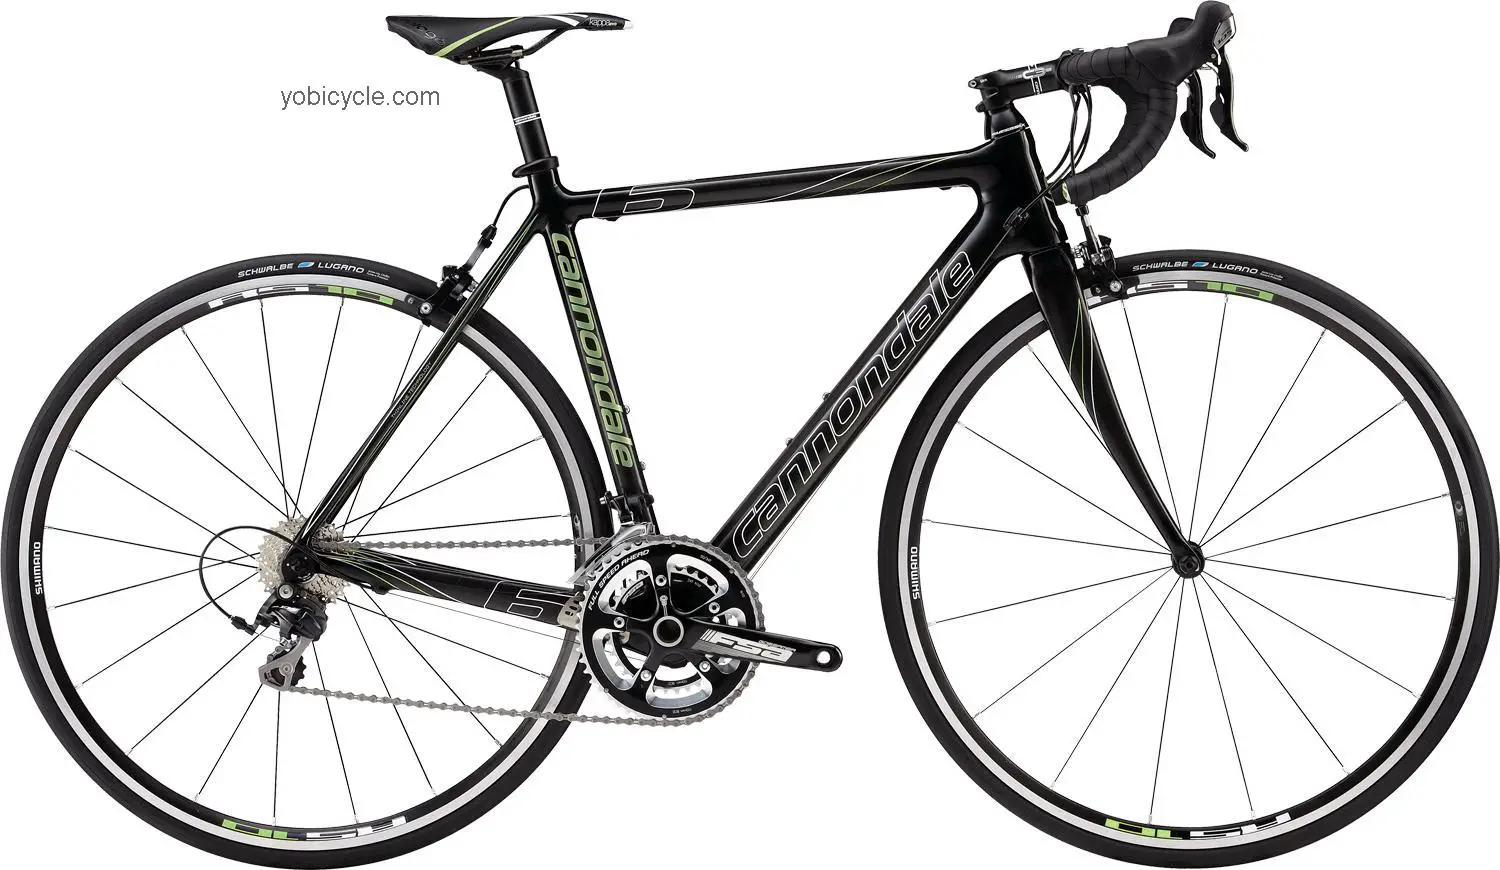 Cannondale Supersix Womens 5 105 2013 comparison online with competitors